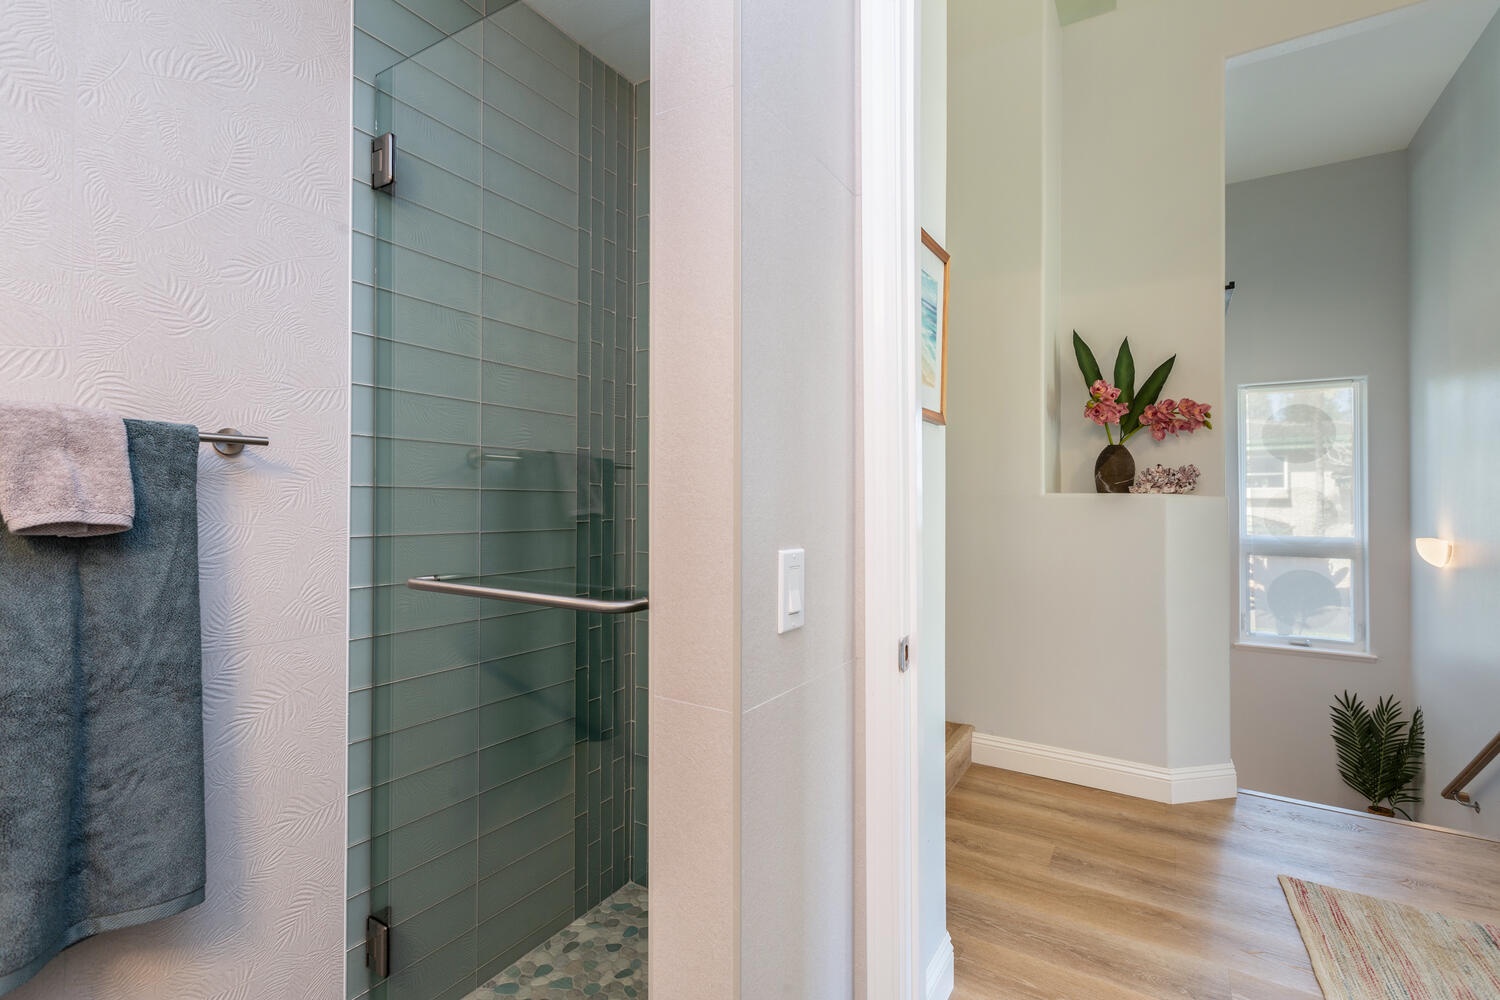 Princeville Vacation Rentals, Sea Glass - Ensuite bathroom with a walk-in shower.